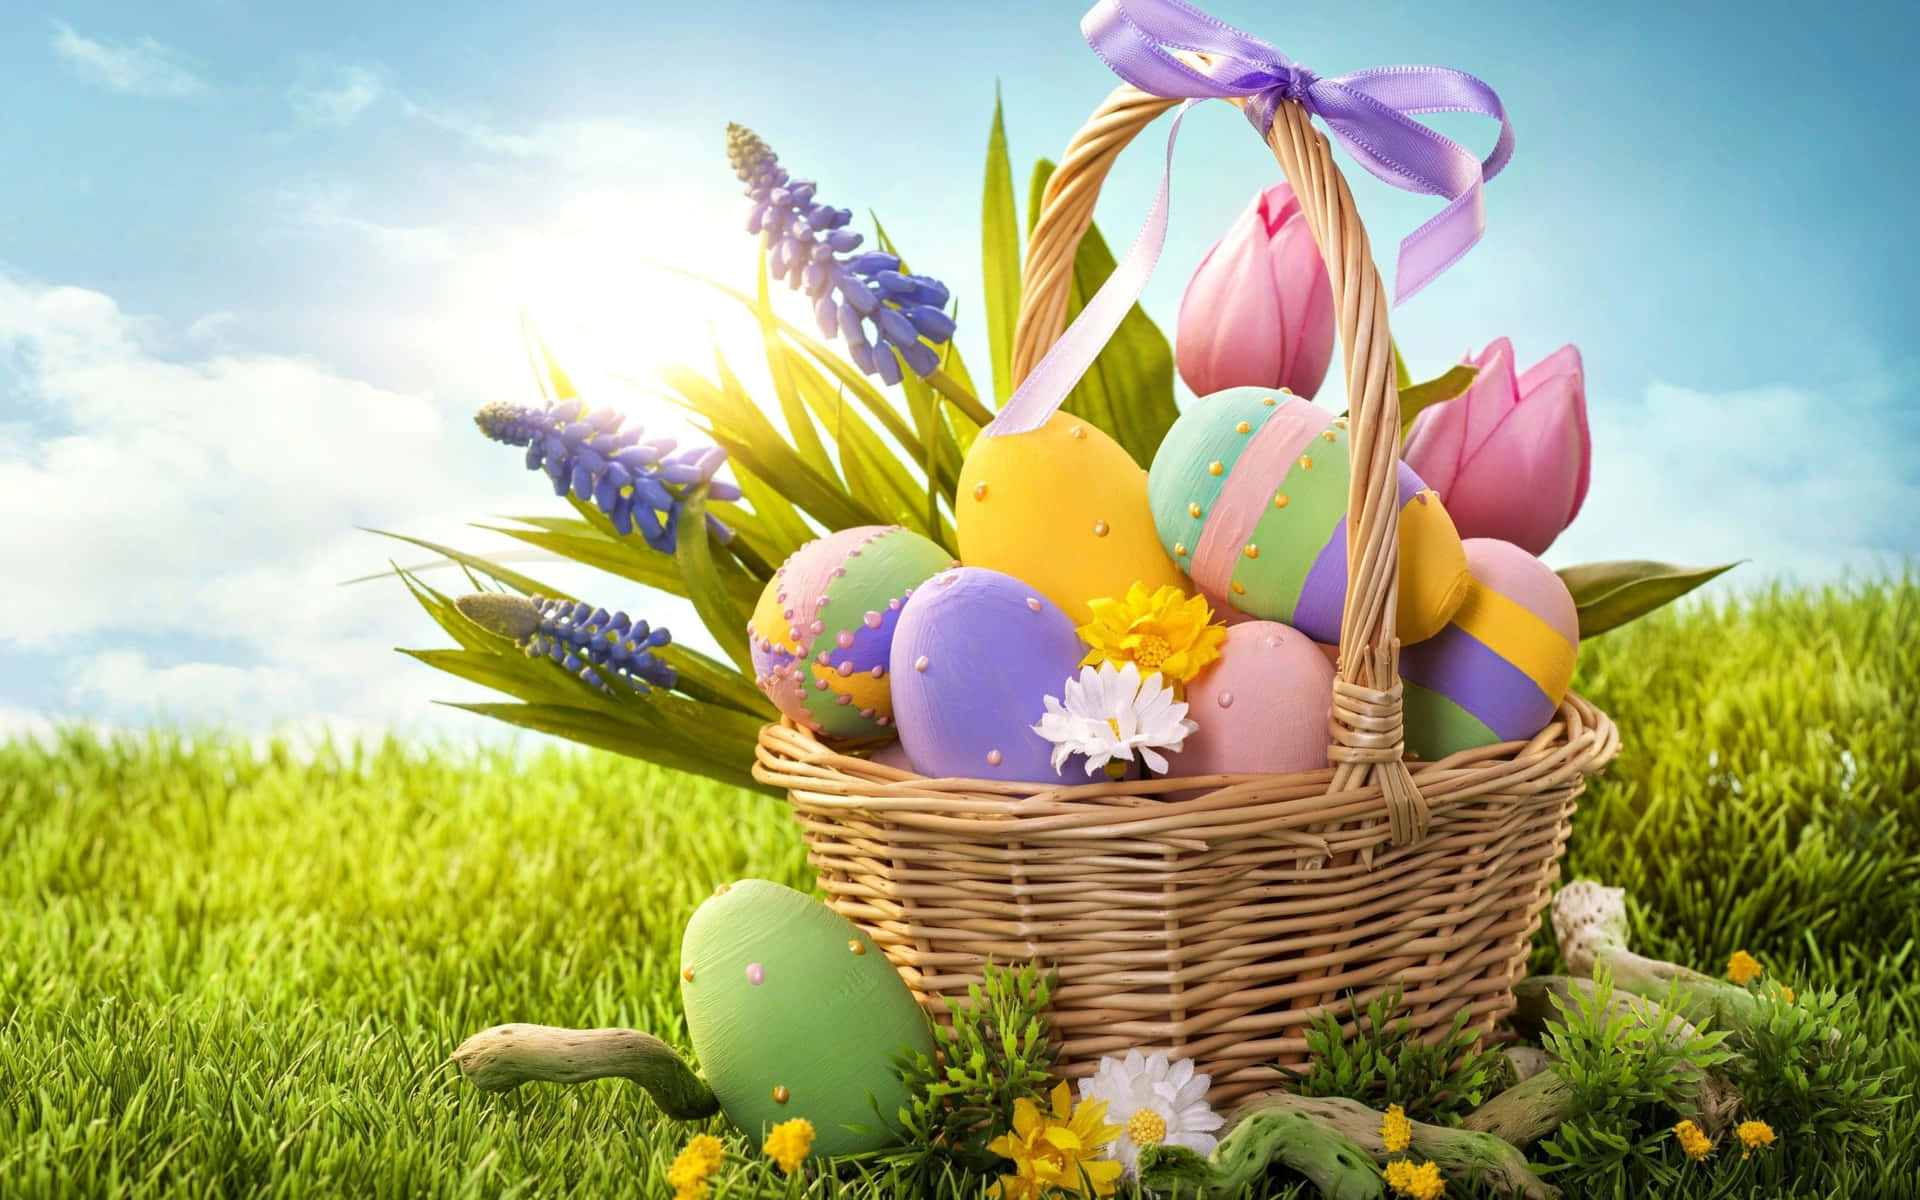 "A colorful and festive Pastel Easter background to celebrate the holiday."